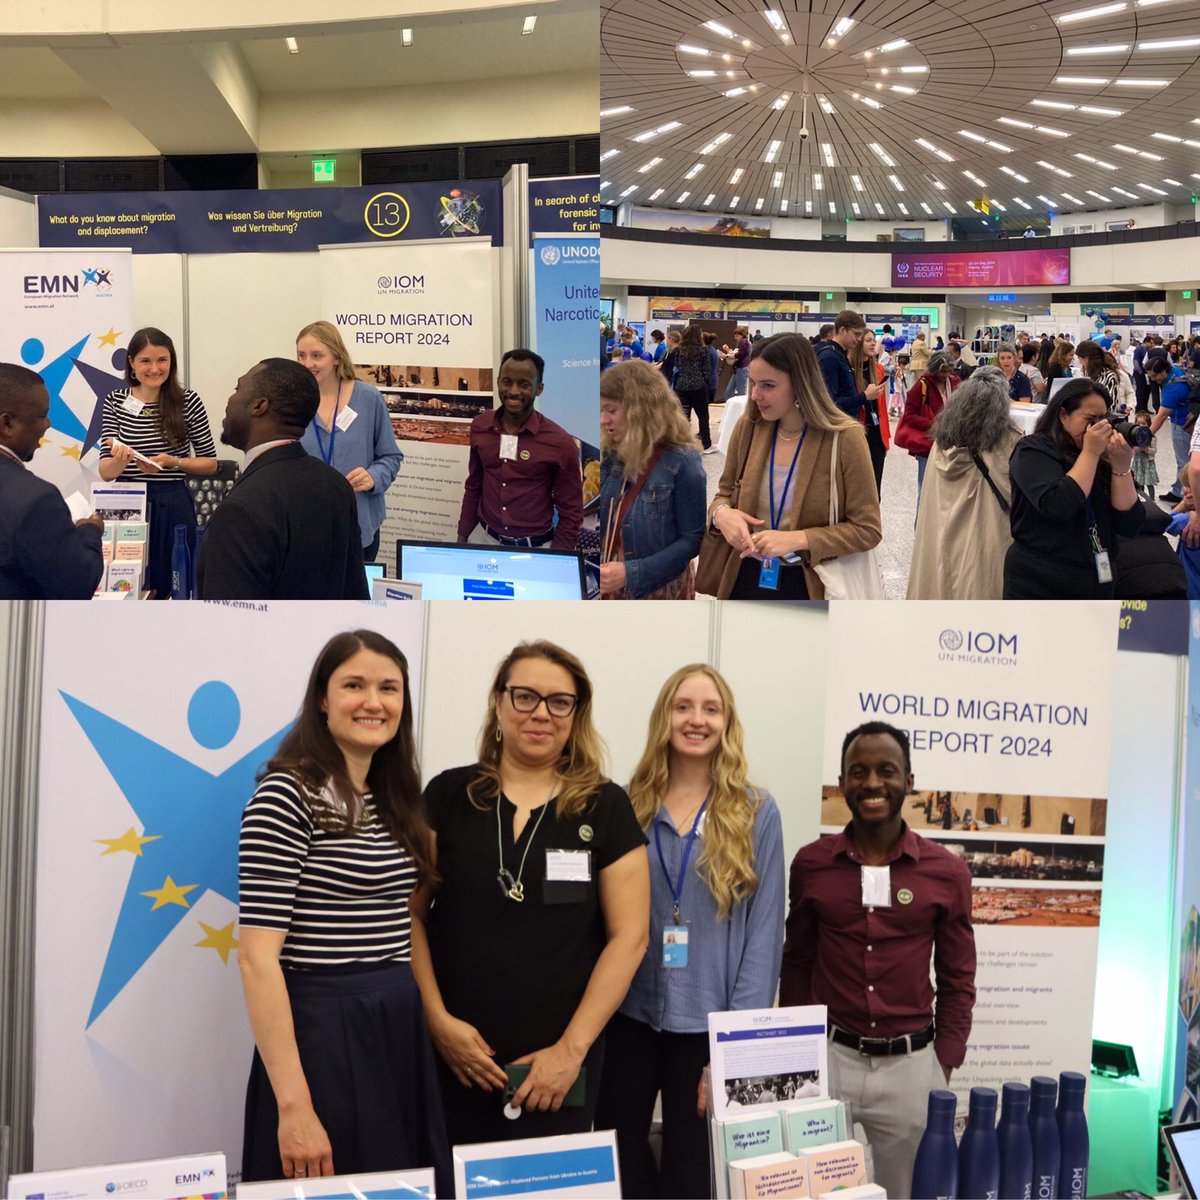 Happening now! Visit our stand at the Long Night of Research in Vienna to learn more about the World Migration Report #WMR2024. 📍 Vienna International Centre (VIC) langenachtderforschung.at/station/5299